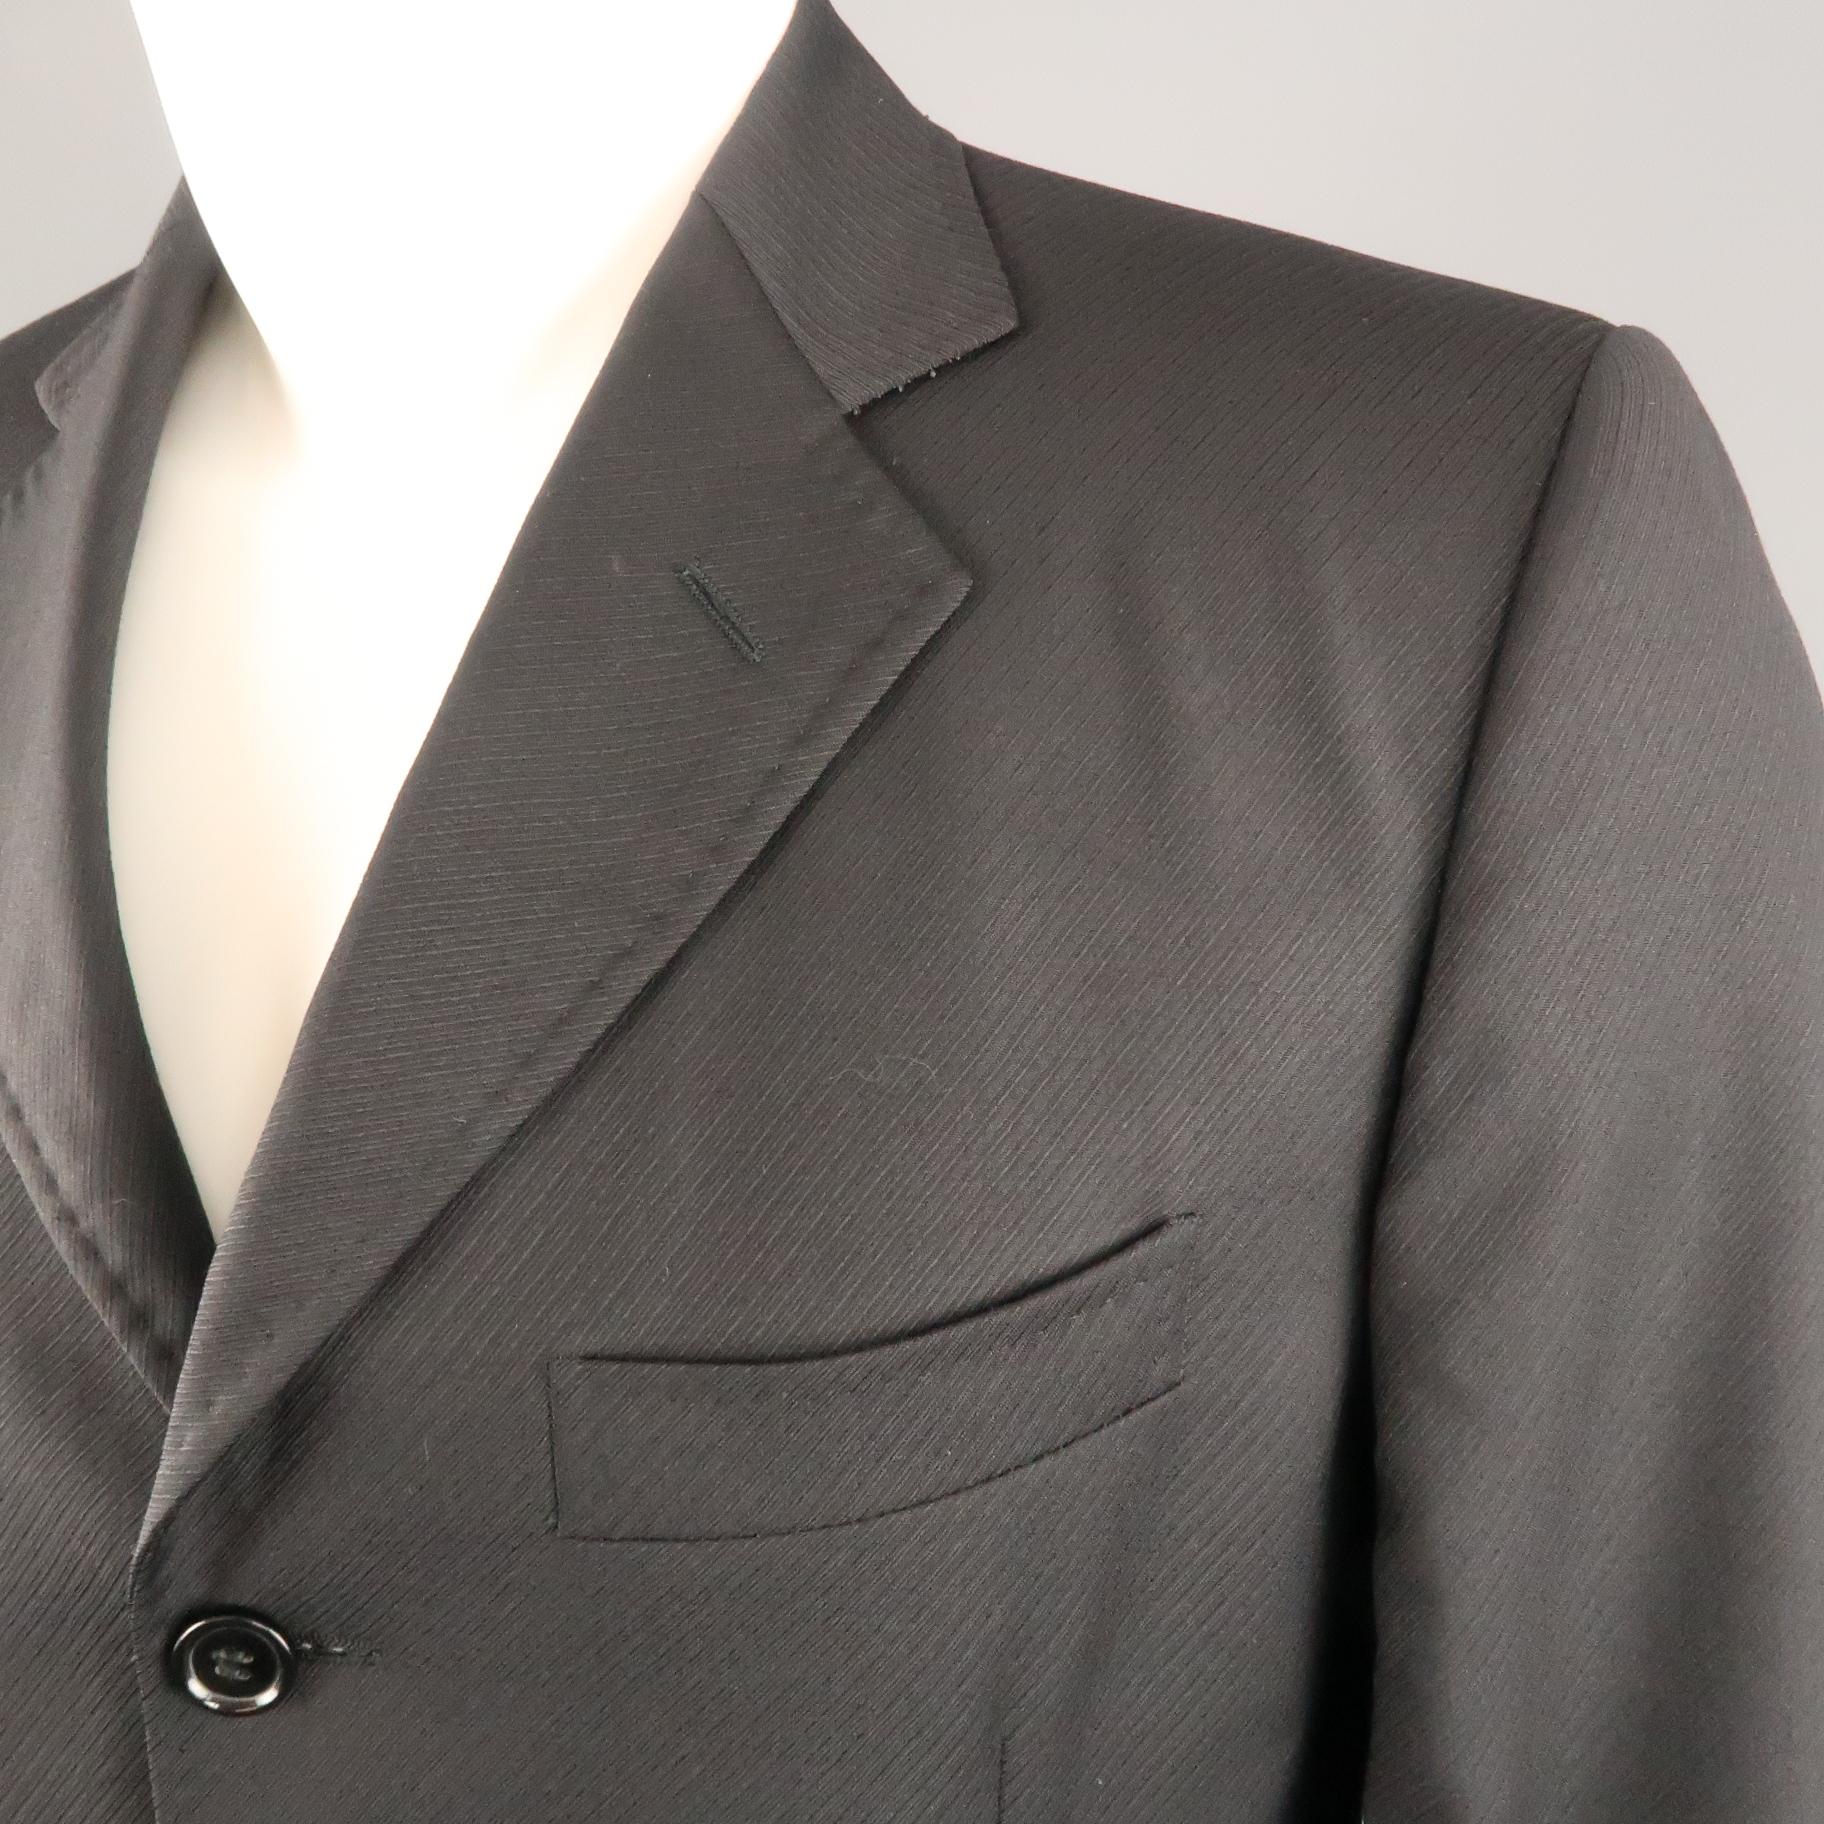 DOLCE & GABBANA sport coat comes in diagonal stripe textured wool with a top stitch notch lapel, single breasted,  three button front, and flap pockets. Made in Italy.
 
Excellent Pre-Owned Condition.
Marked: IT 48
 
Measurements:
 
Shoulder: 17